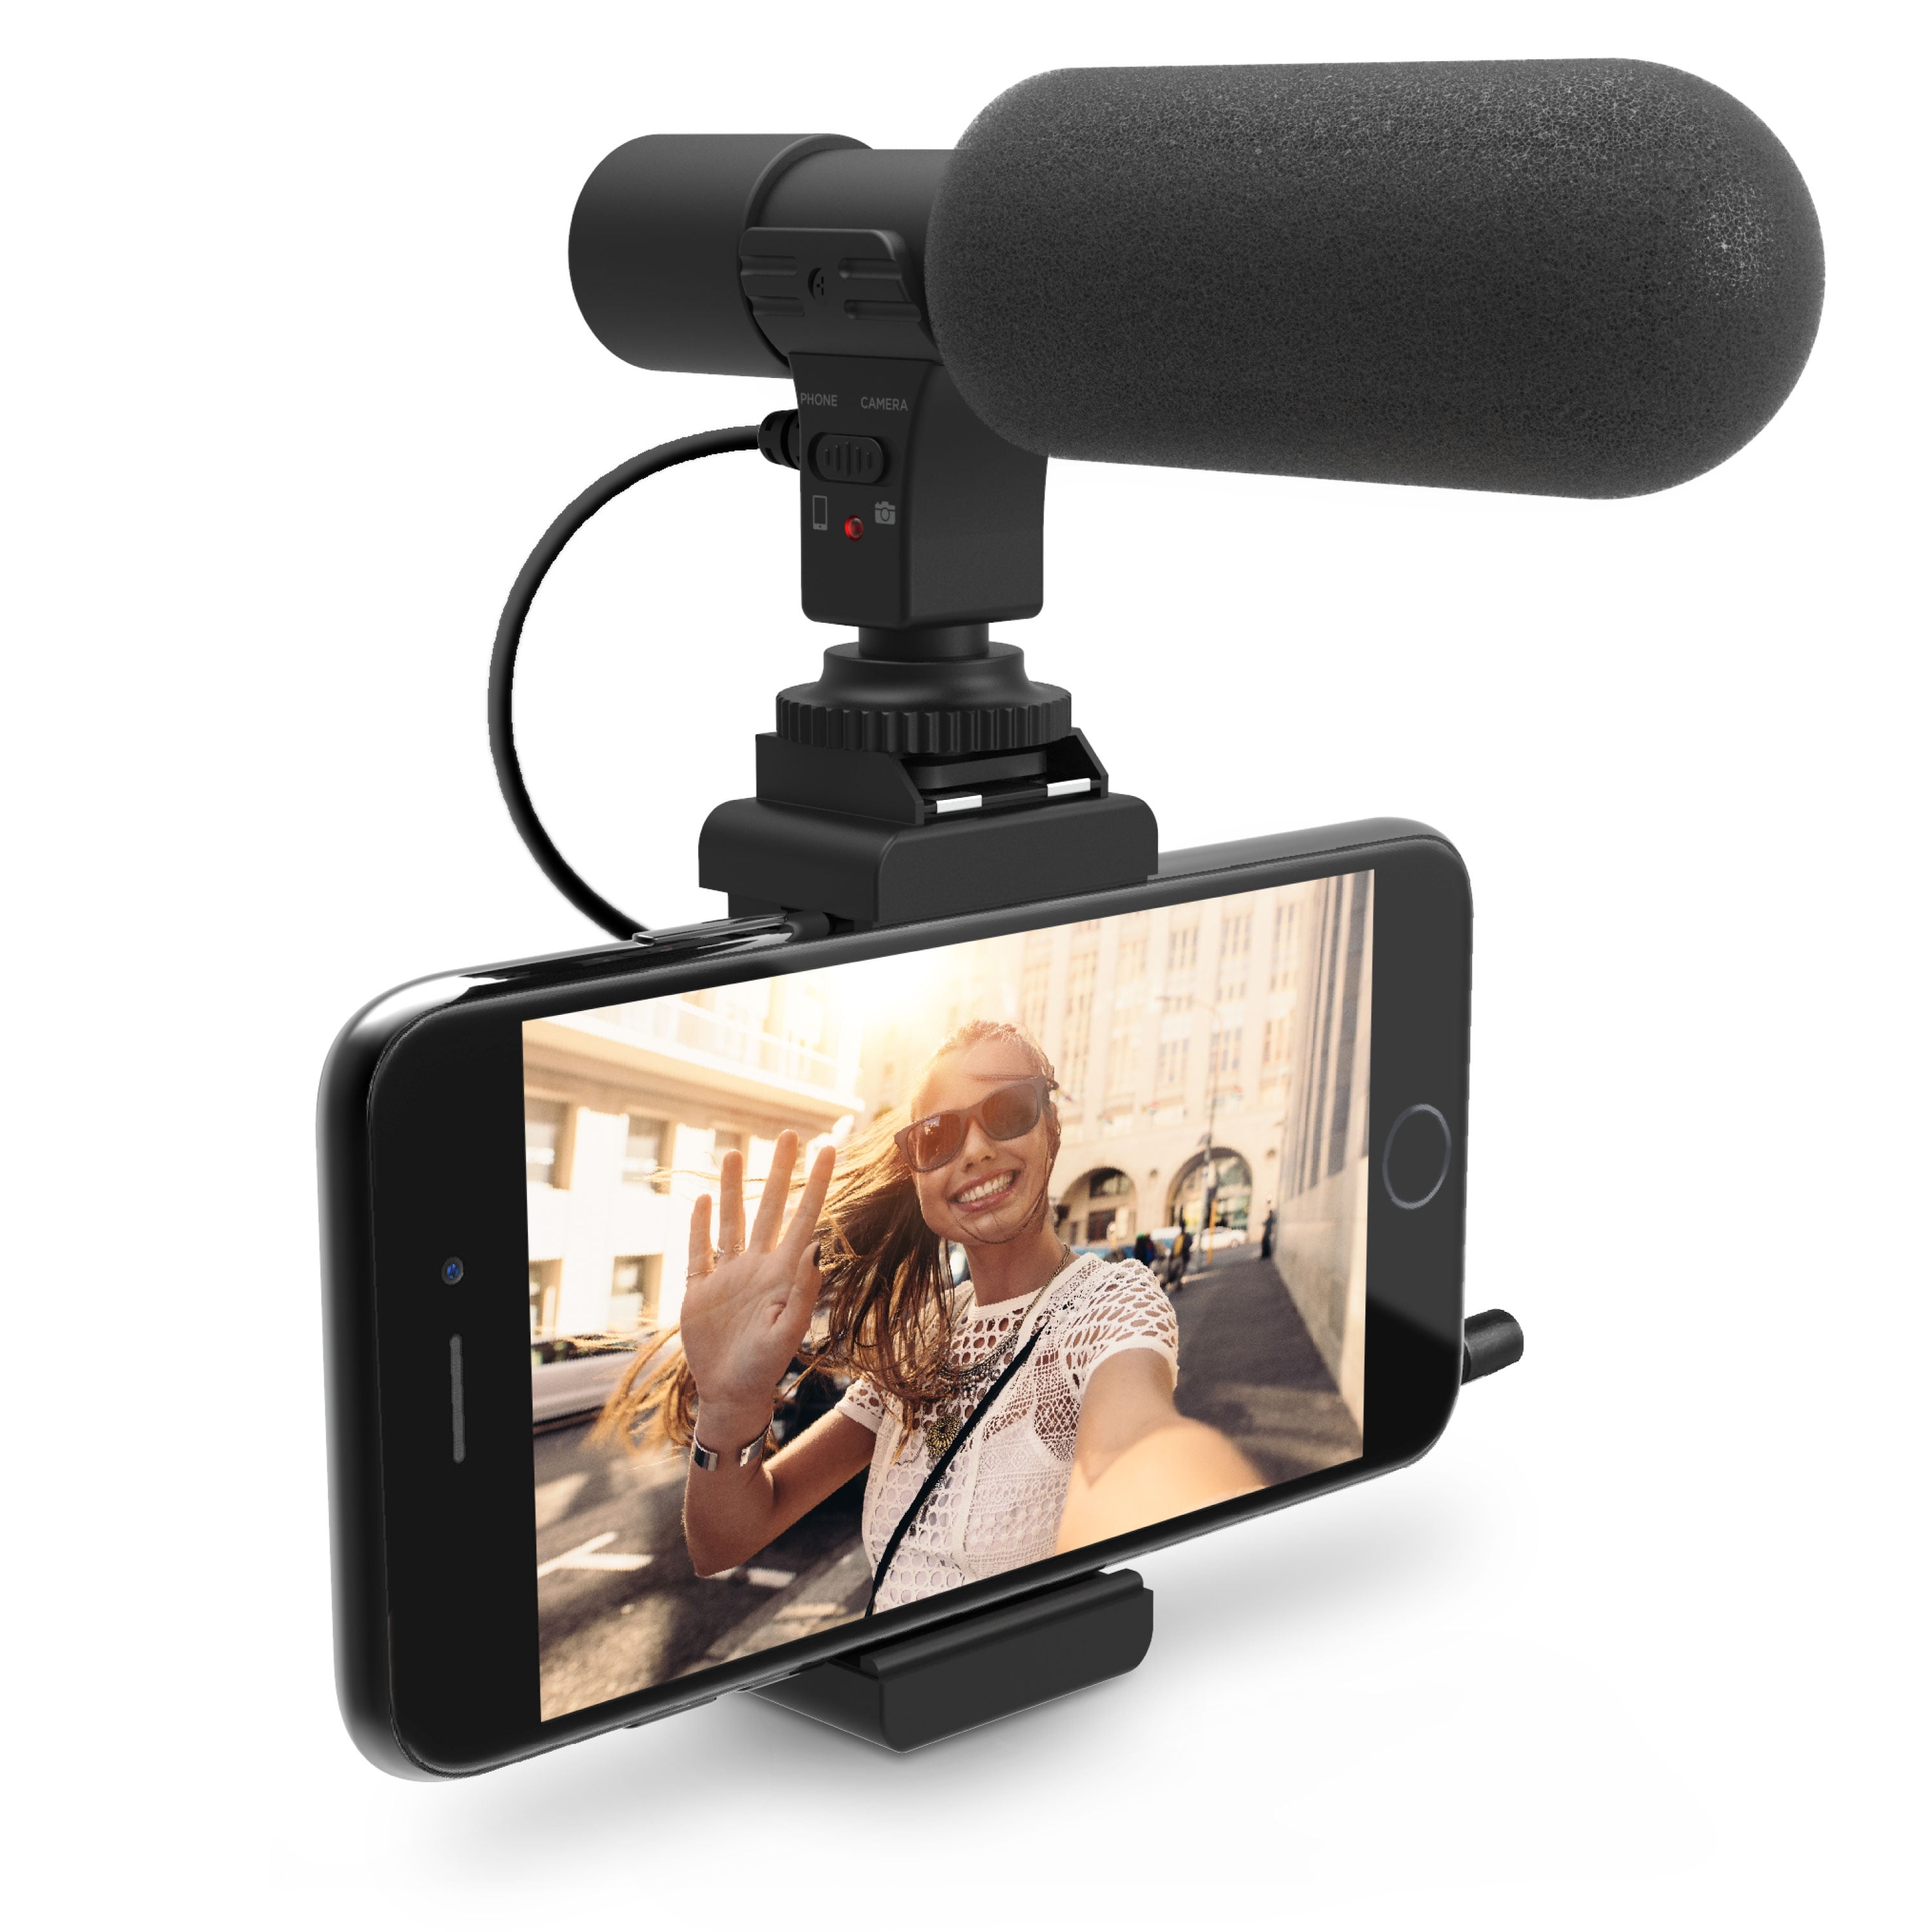 Bower HD Microphone Kit with Cold Shoe Mount, Smartphone